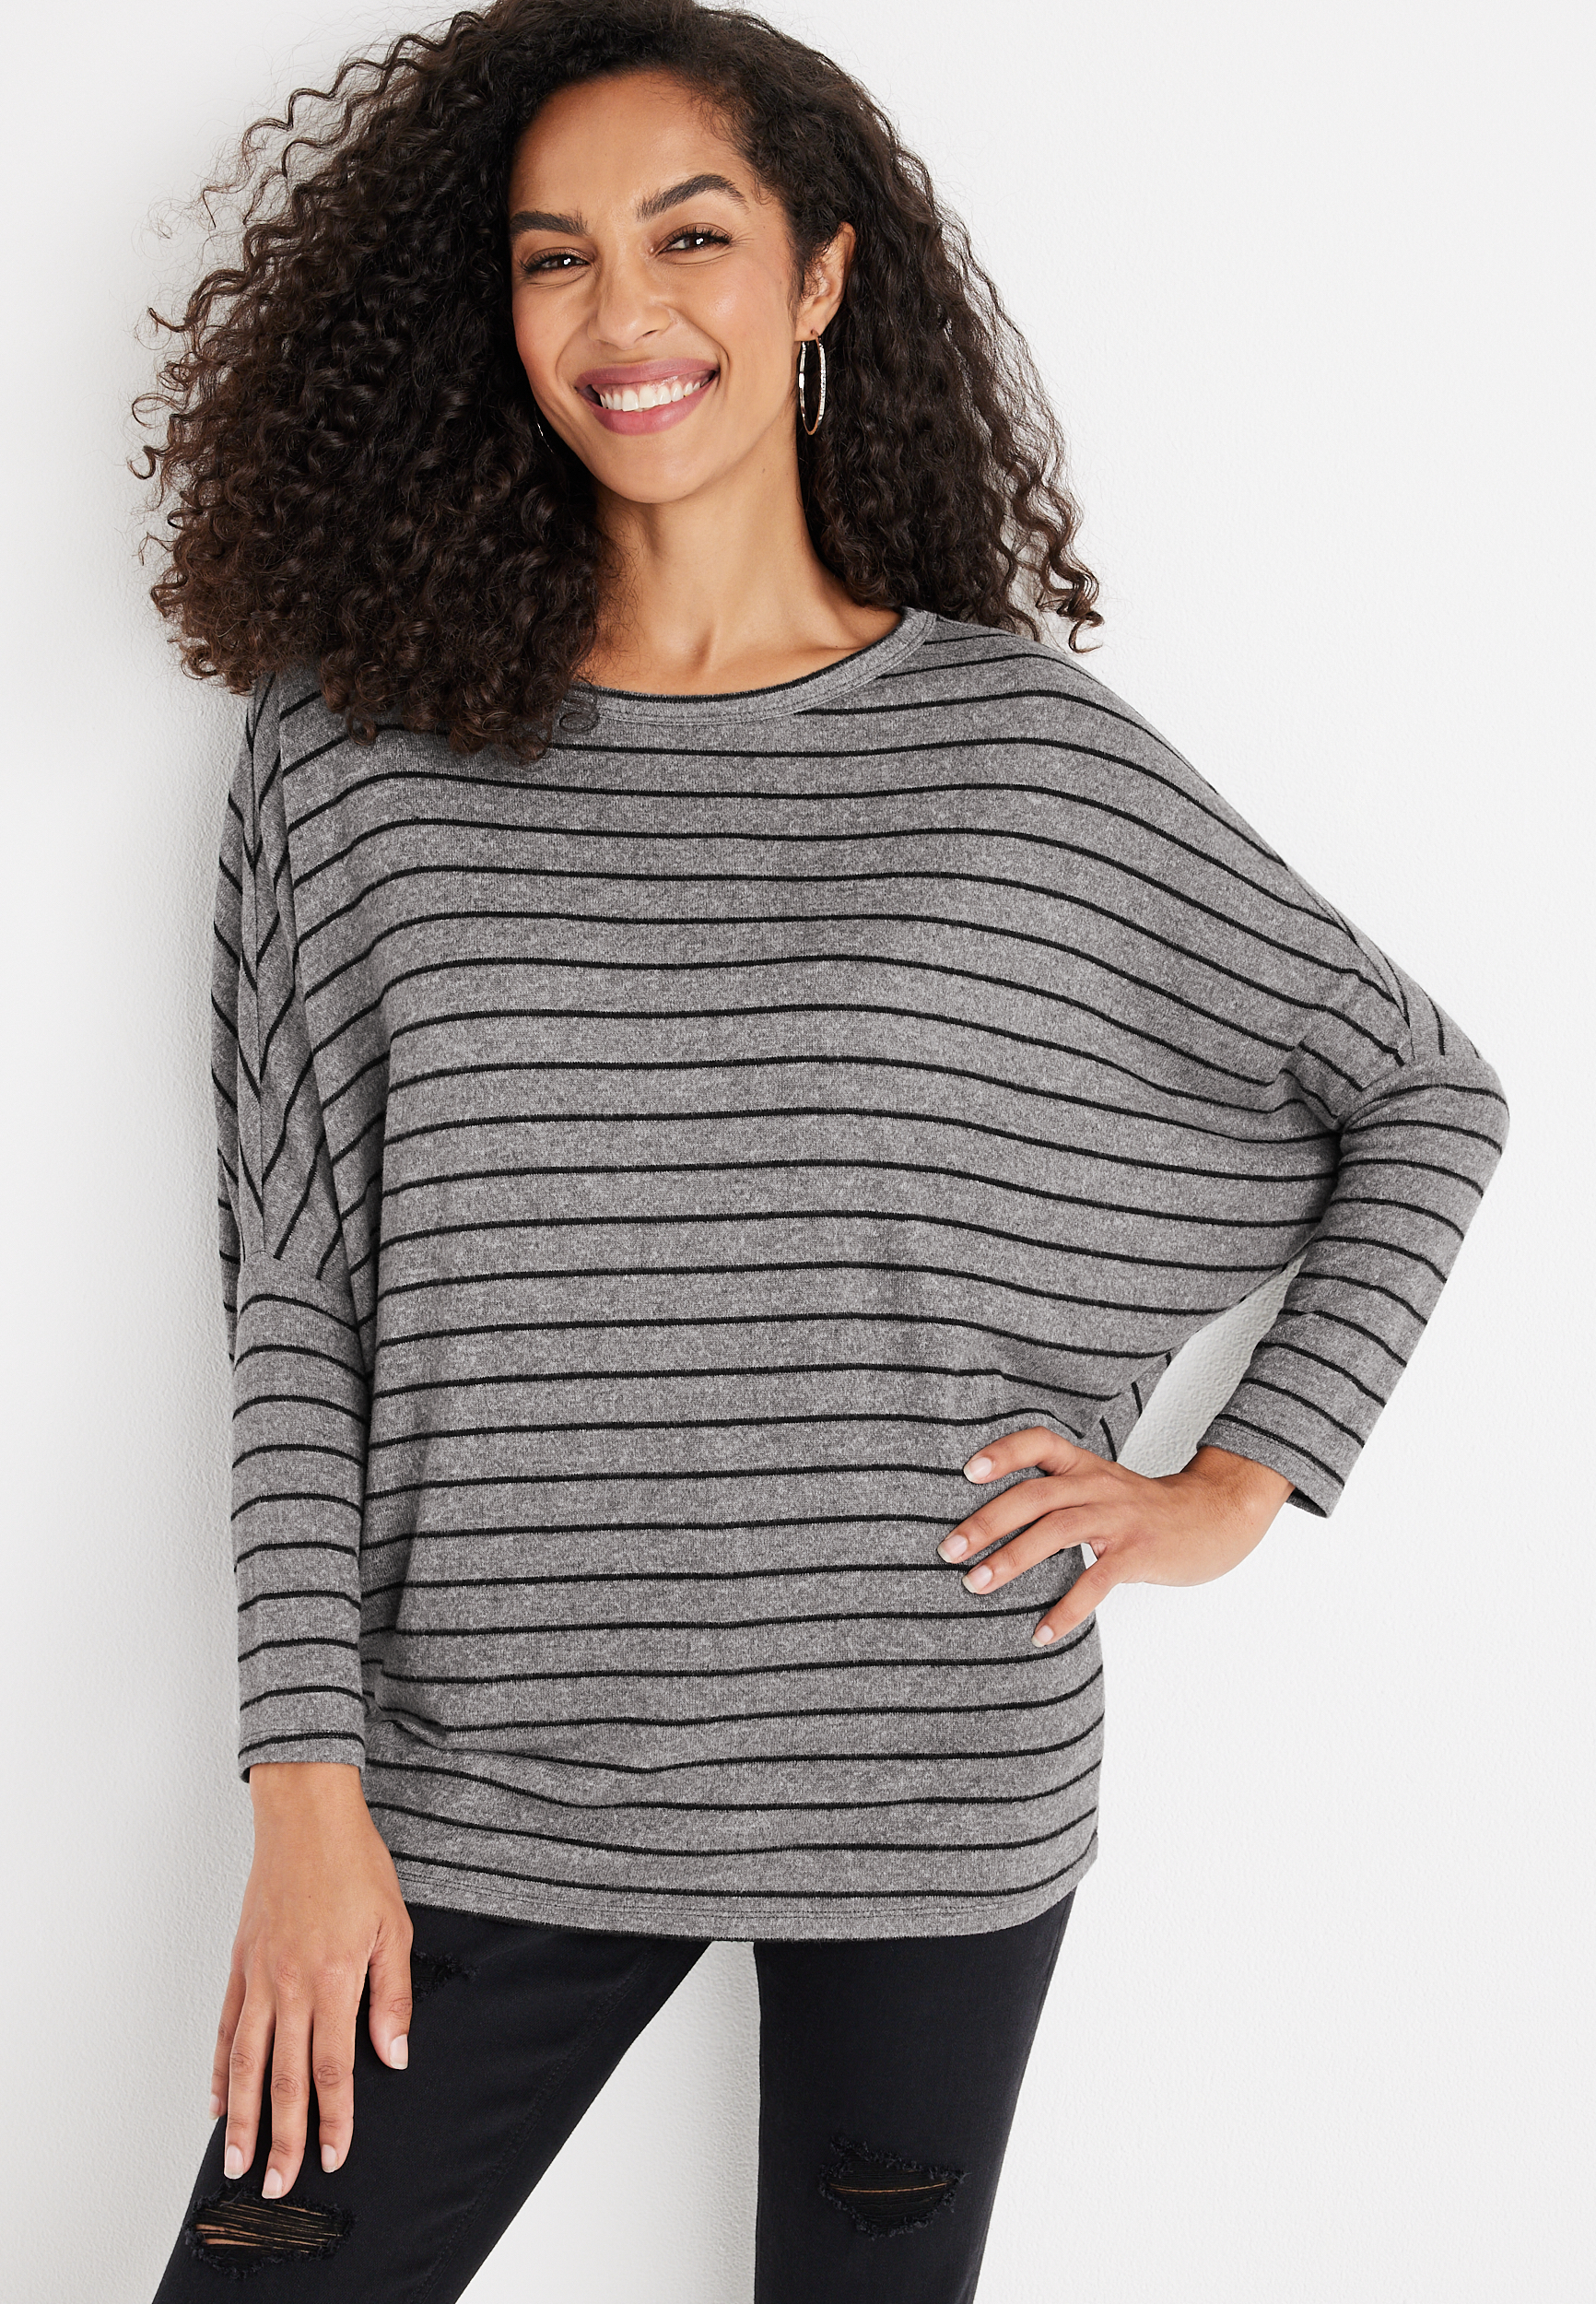 24/7 Flawless Cozy Striped Dolman Long Sleeve Tee | maurices